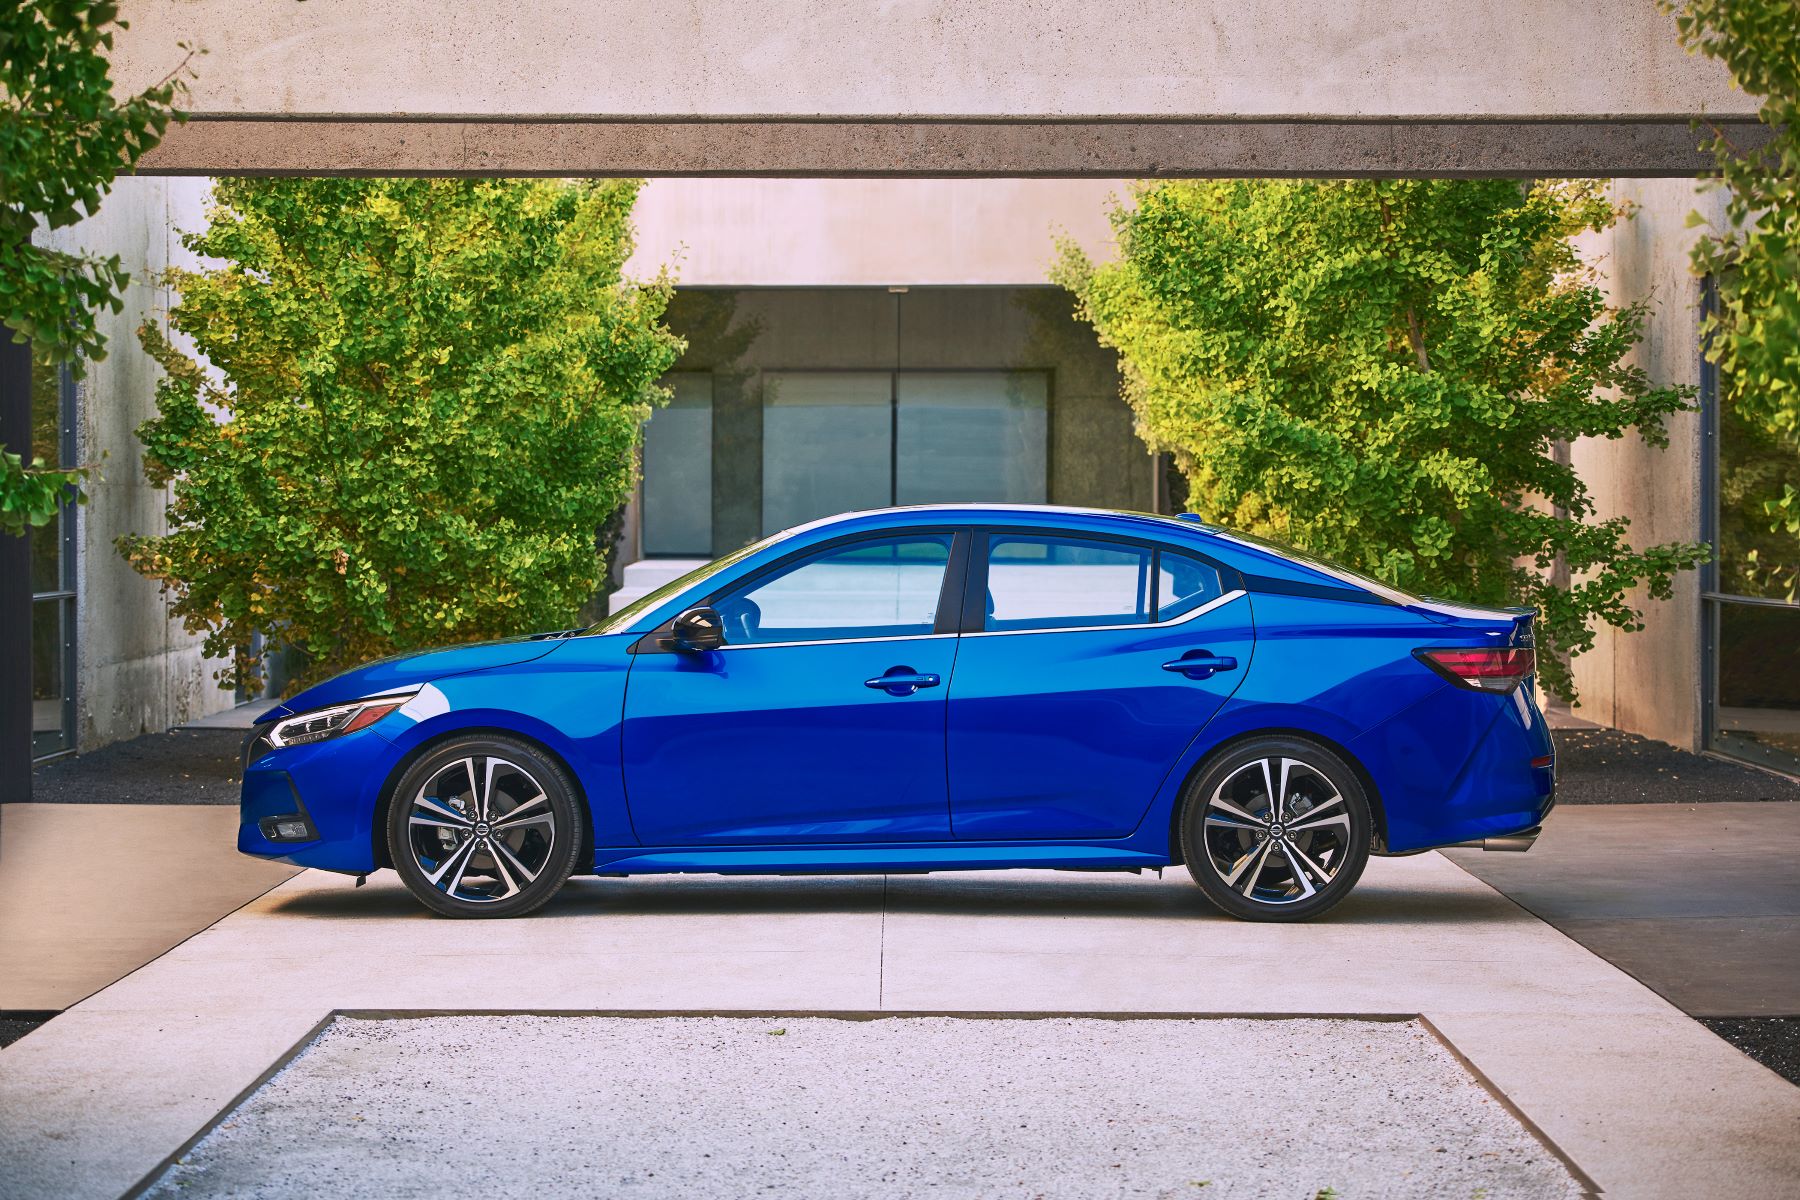 The 2022 Nissan Sentra SR compact sedan with the blue paint color option